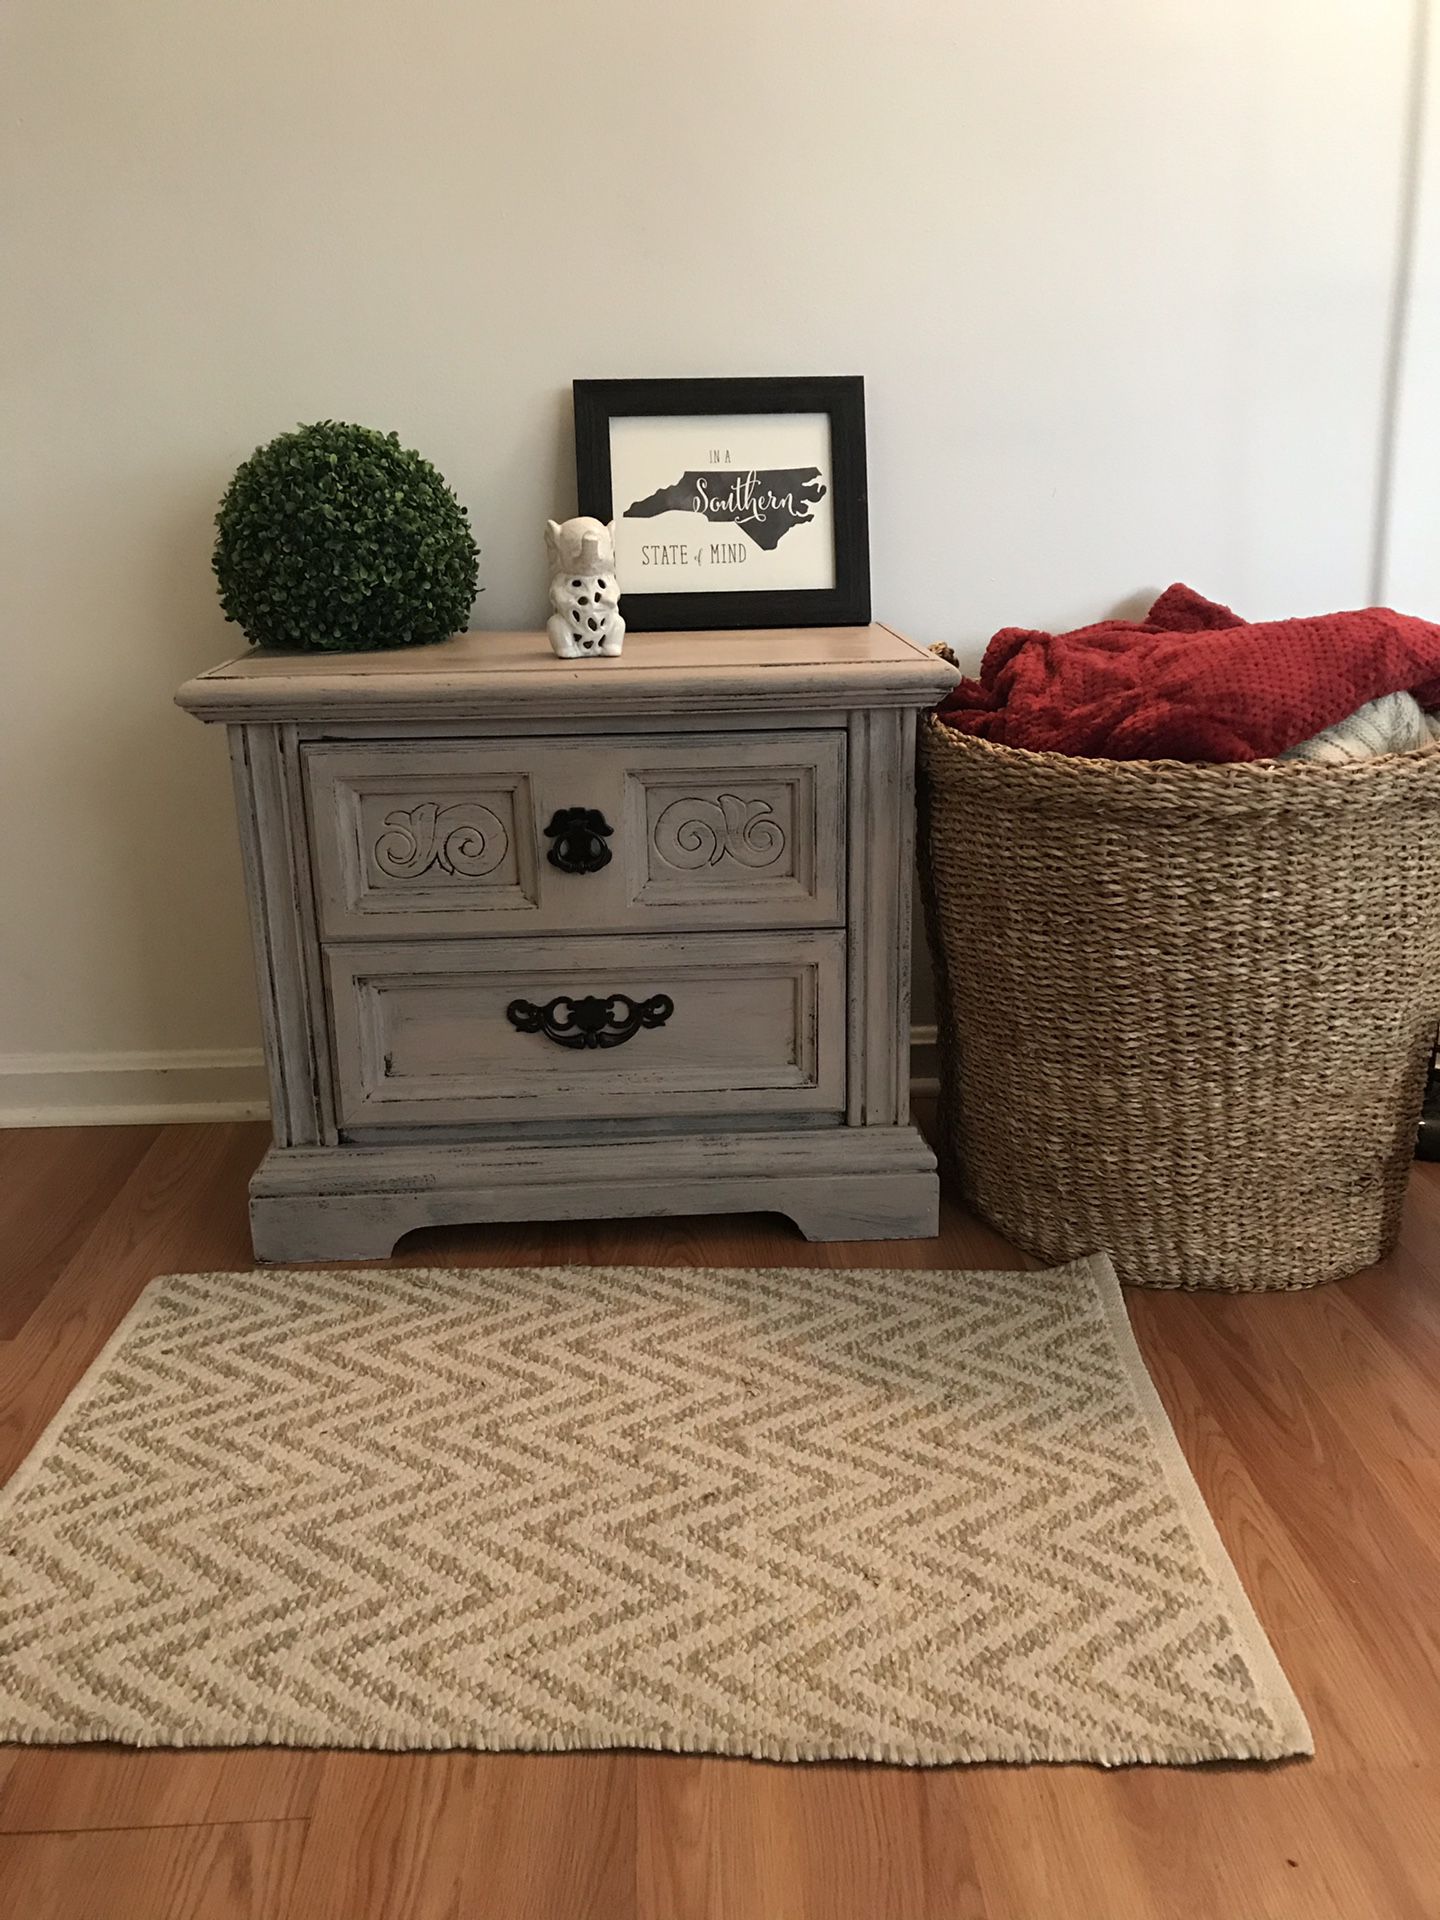 Distressed/shabby chic end table